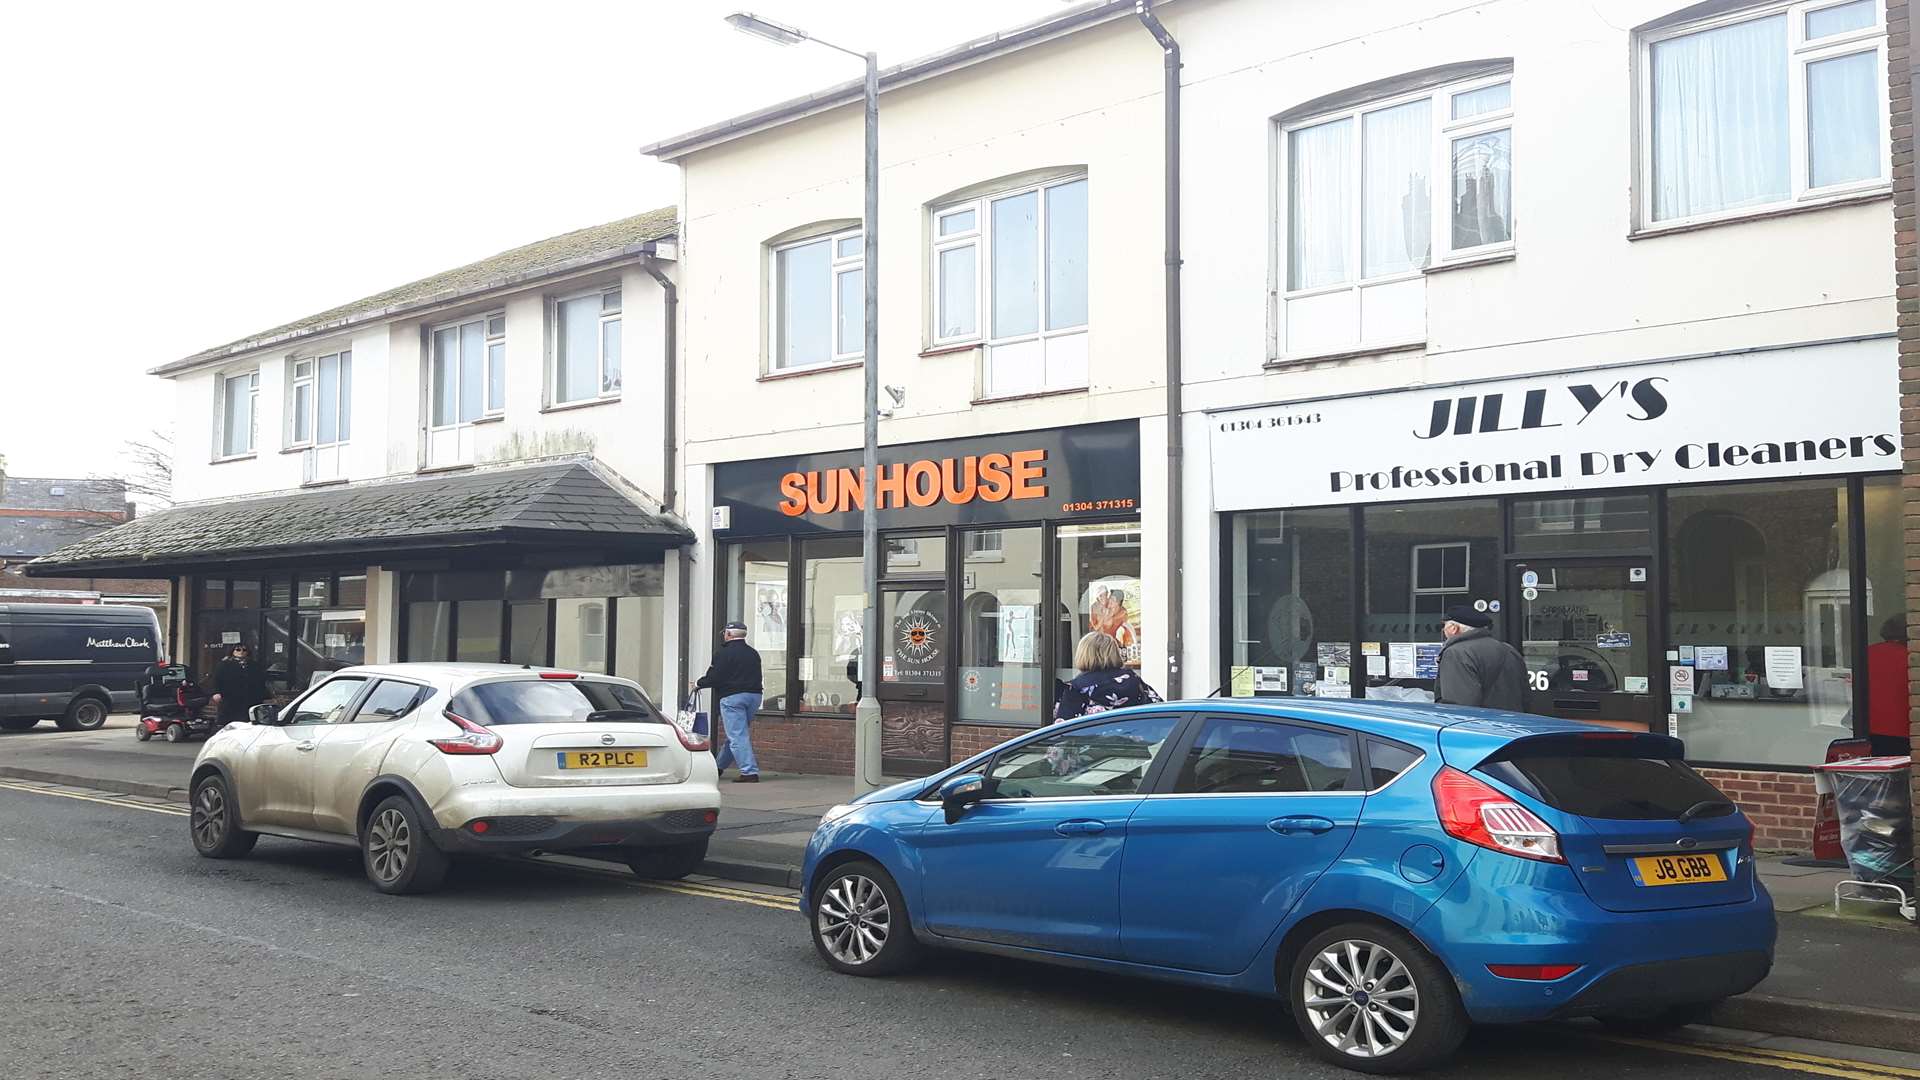 The Sun House and Jilly's have confirmed they will relocate